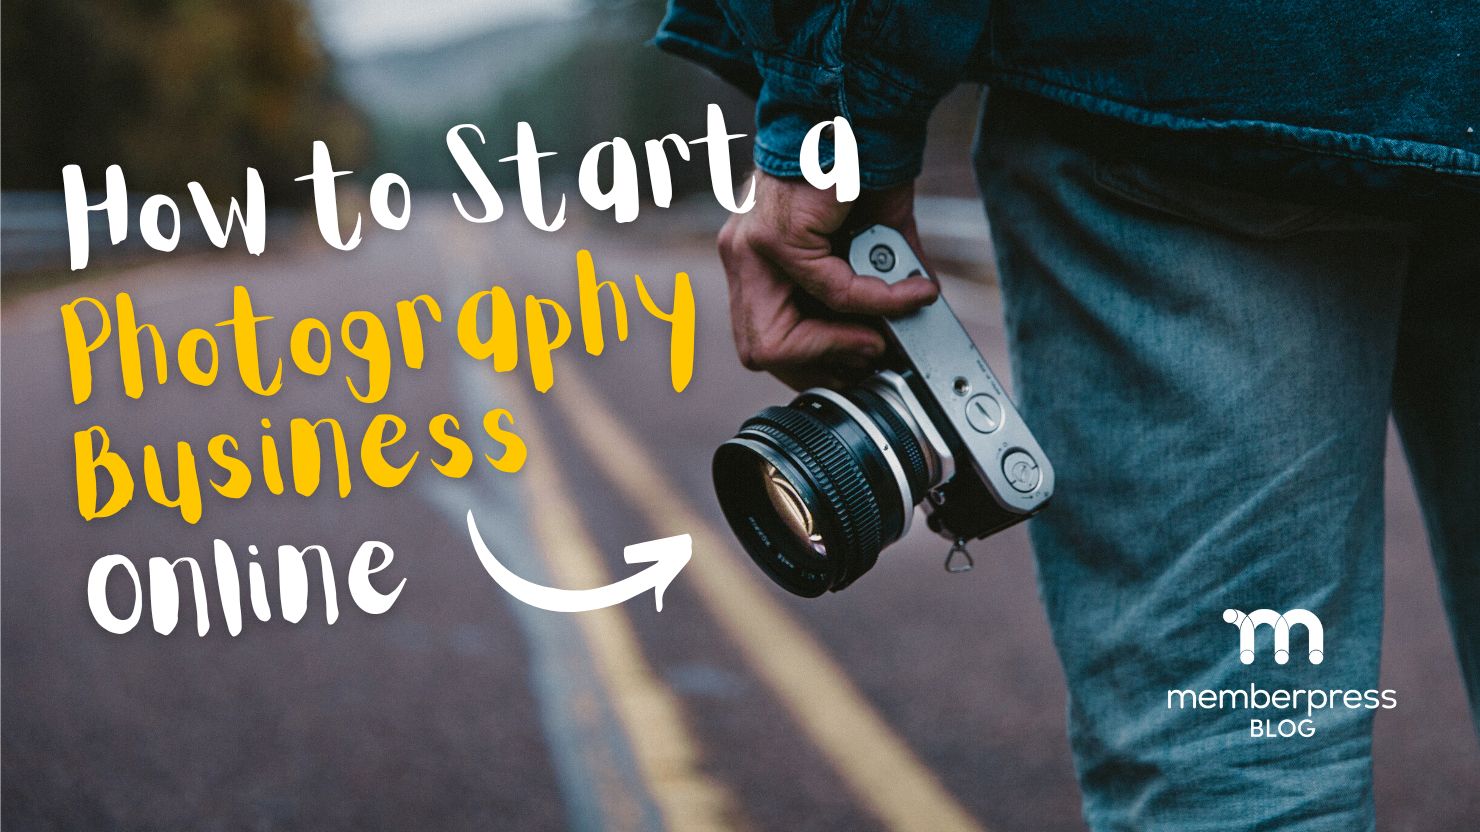 How to start a photography business online with WordPress